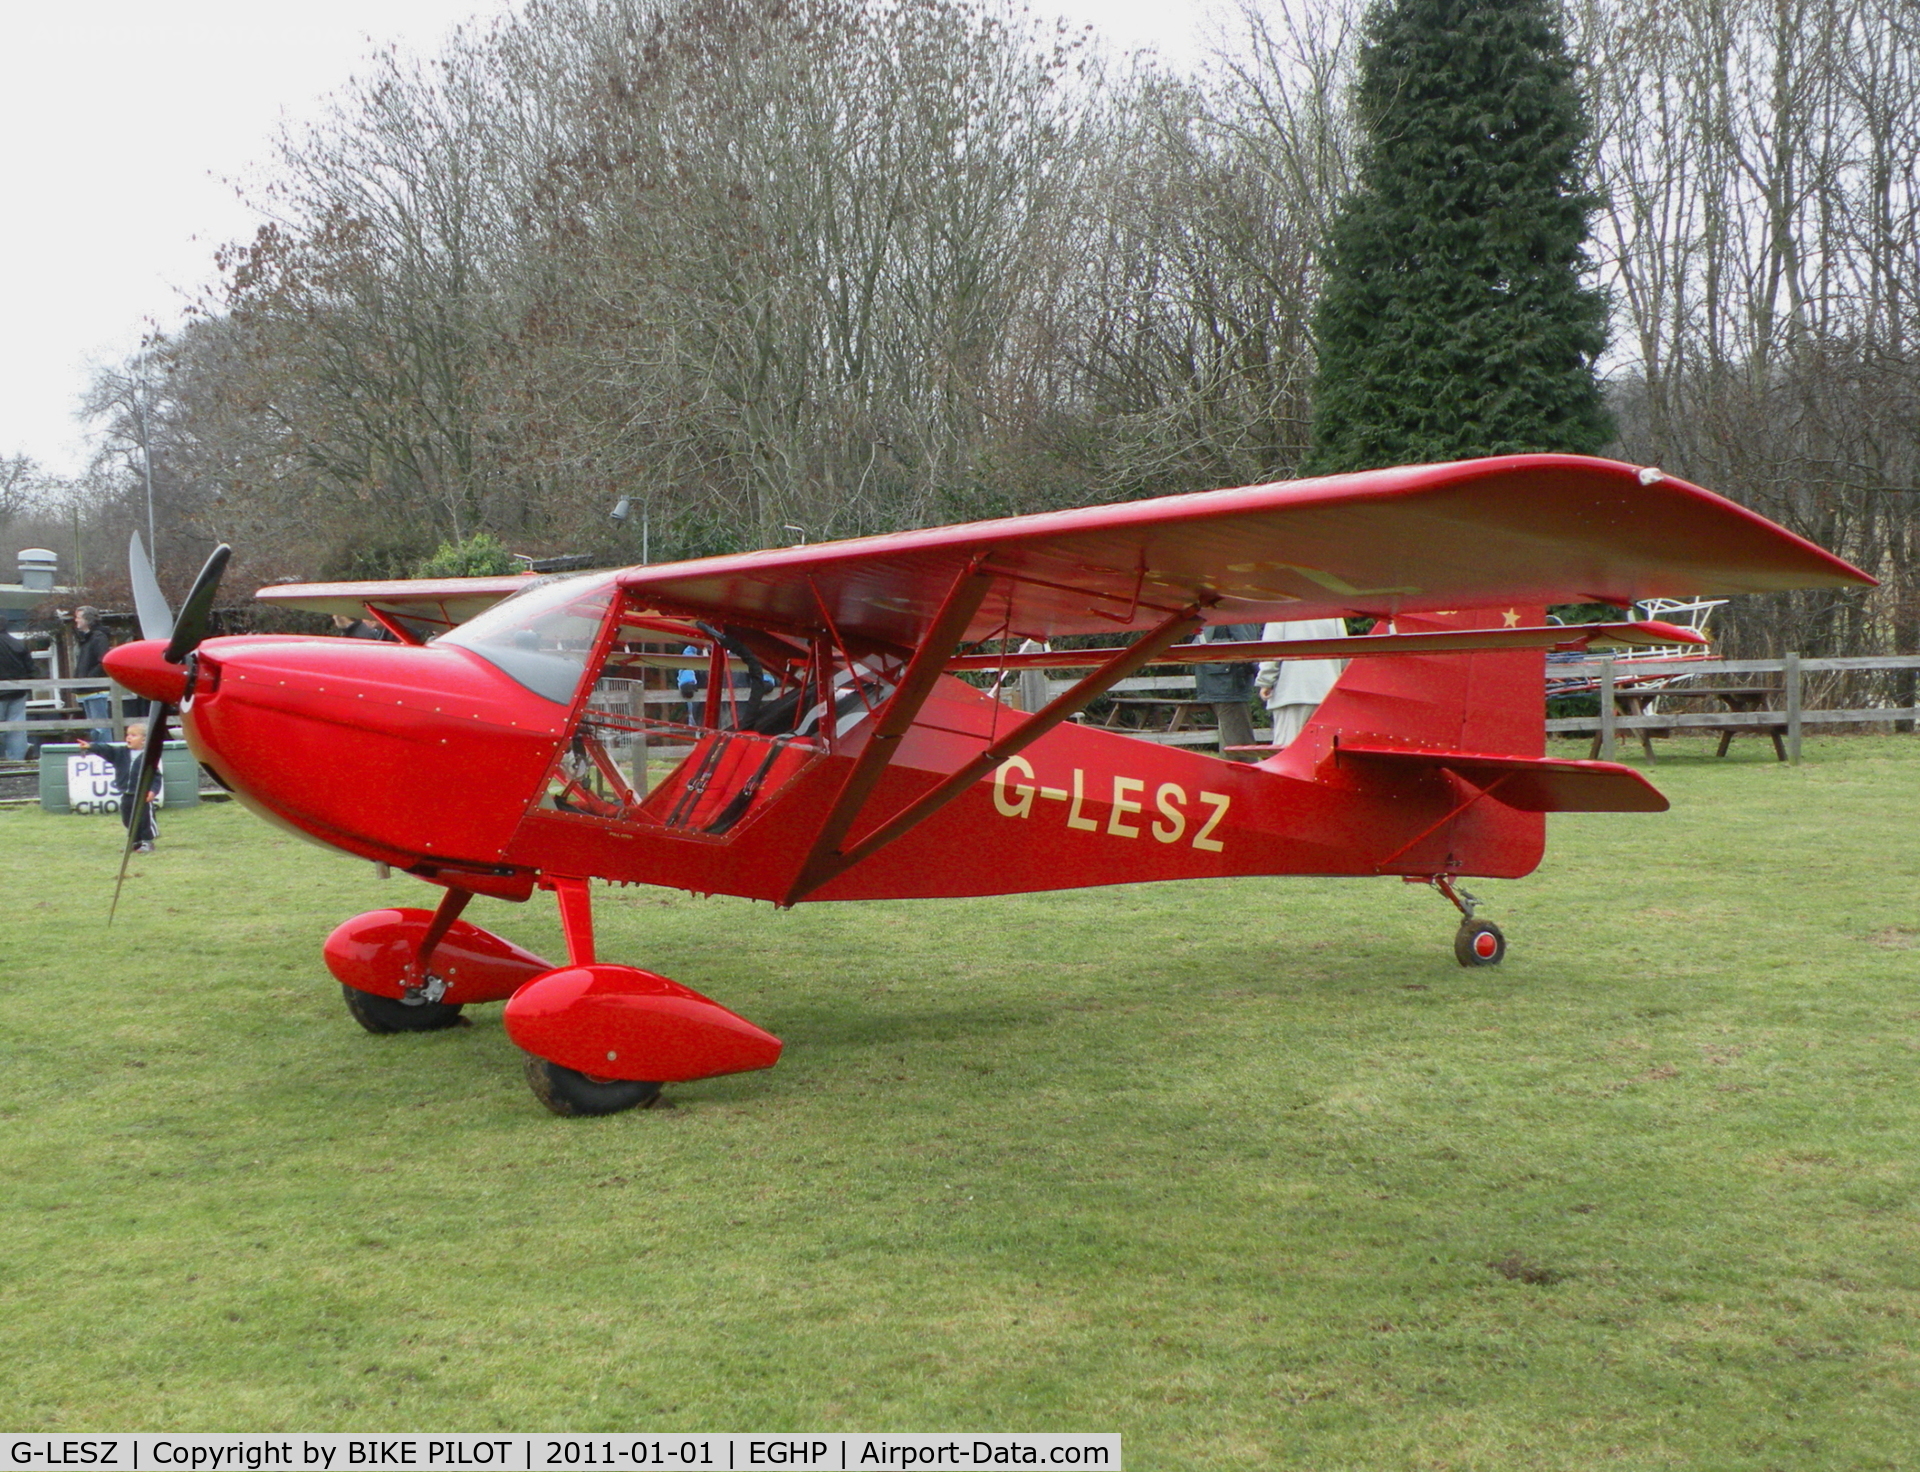 G-LESZ, 2003 Skystar Kitfox Series 5 C/N PFA 172C-12822, Not sure of current engine but previously had a Rotec R2800 radial engine